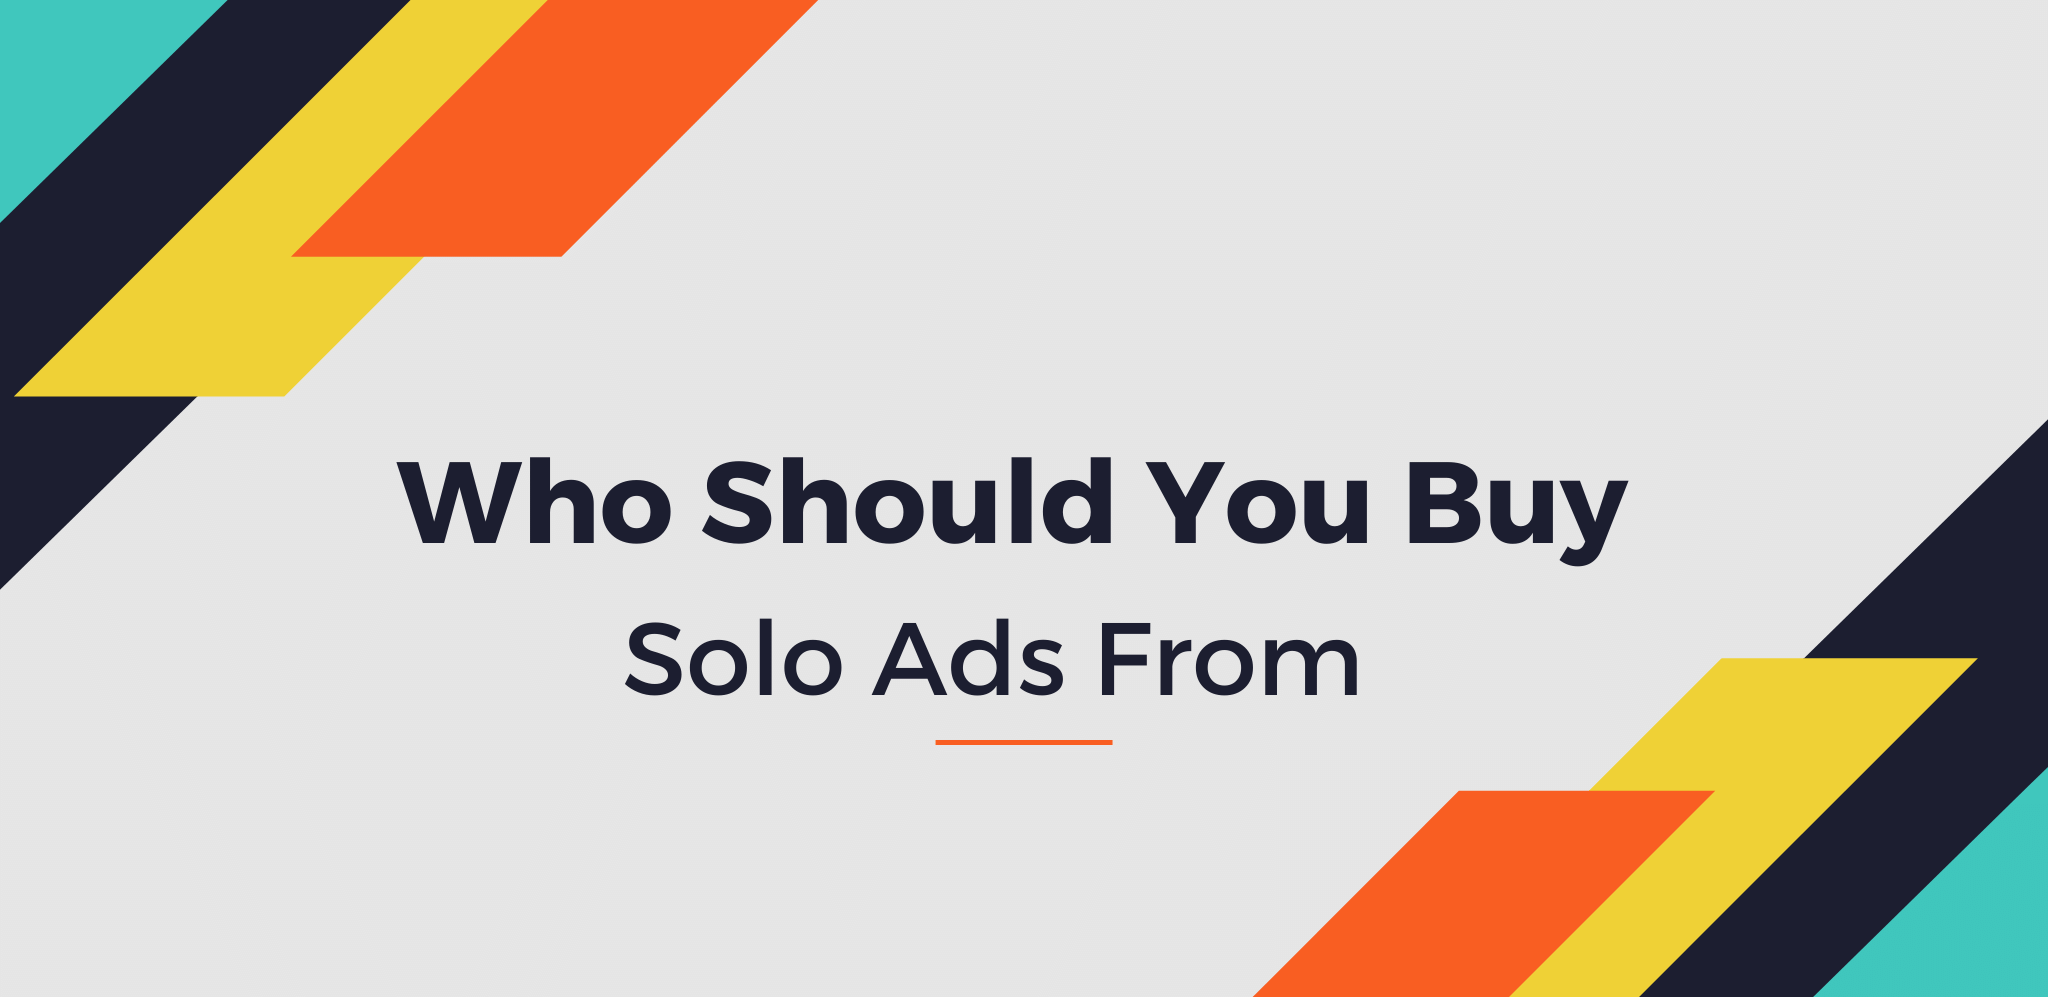 Who Should You Buy Solo Ads From